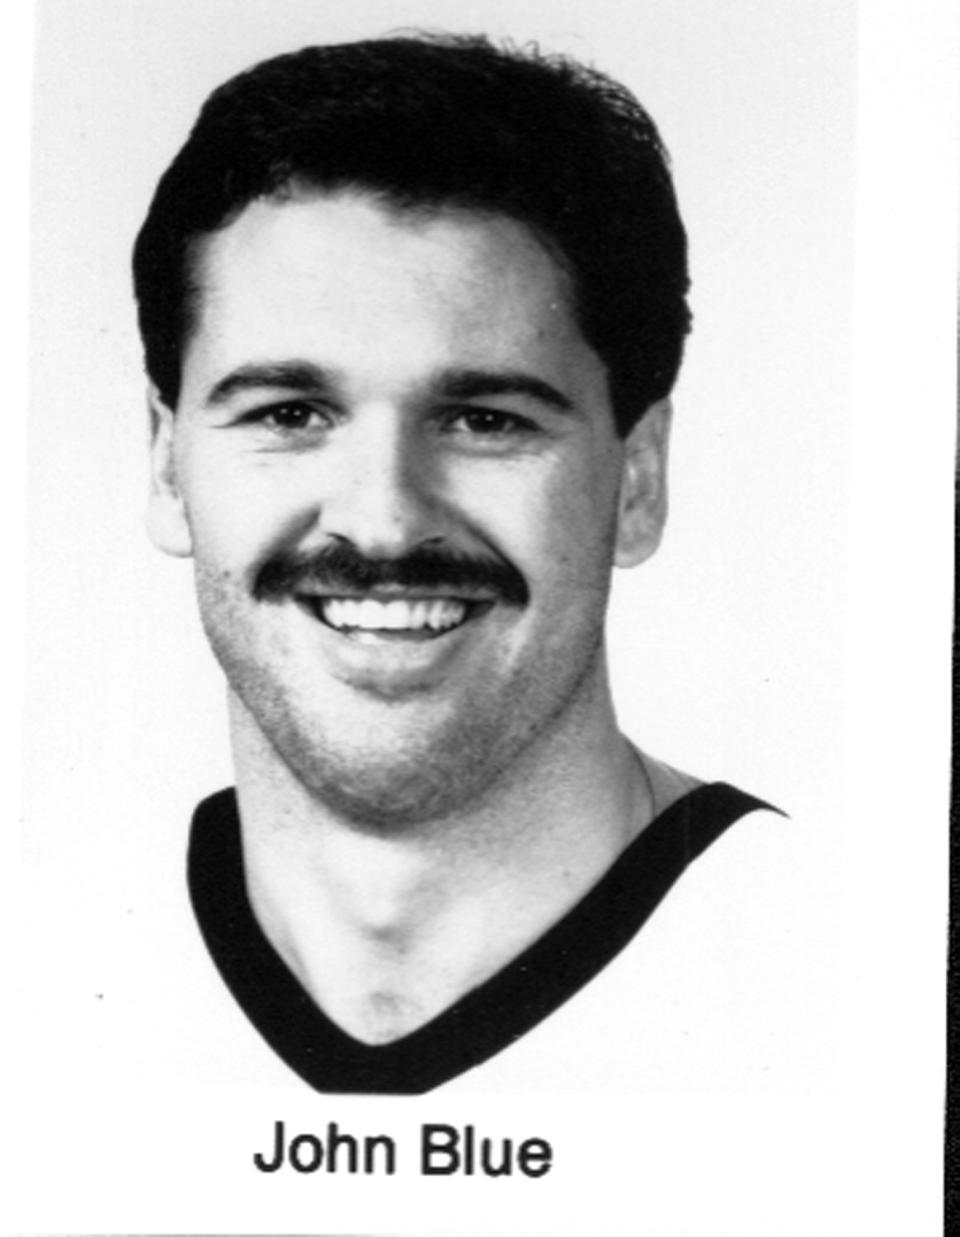 John Blue during his playing days with the Boston Bruins